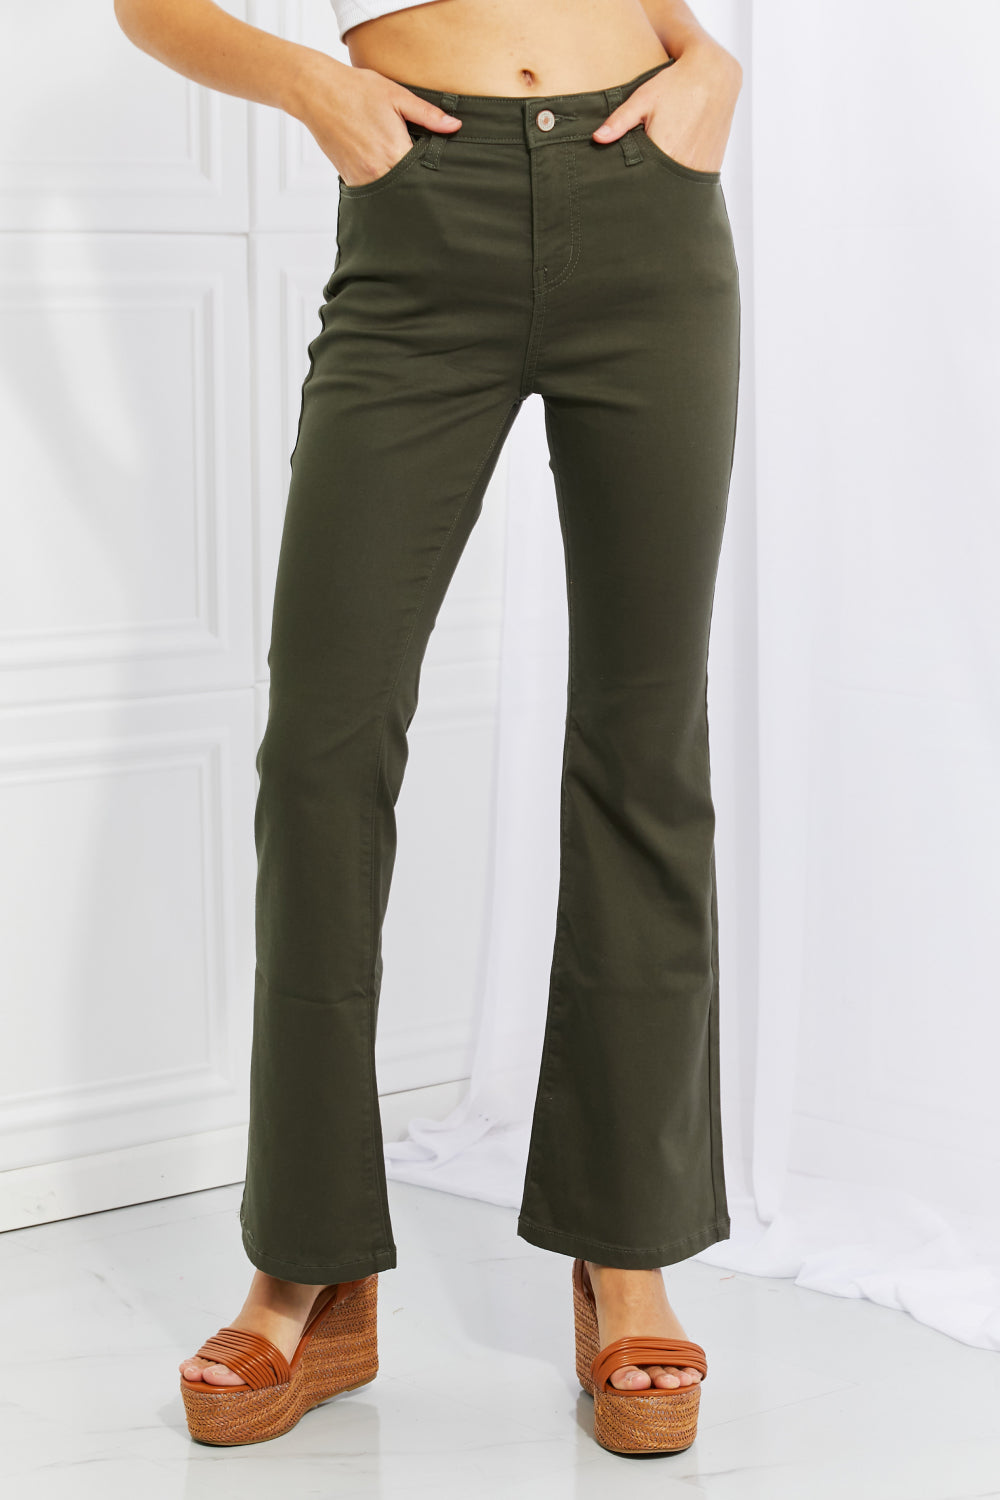 Zenana Clementine High-Rise Bootcut Pants in Dark Olive  Southern Soul Collectives 